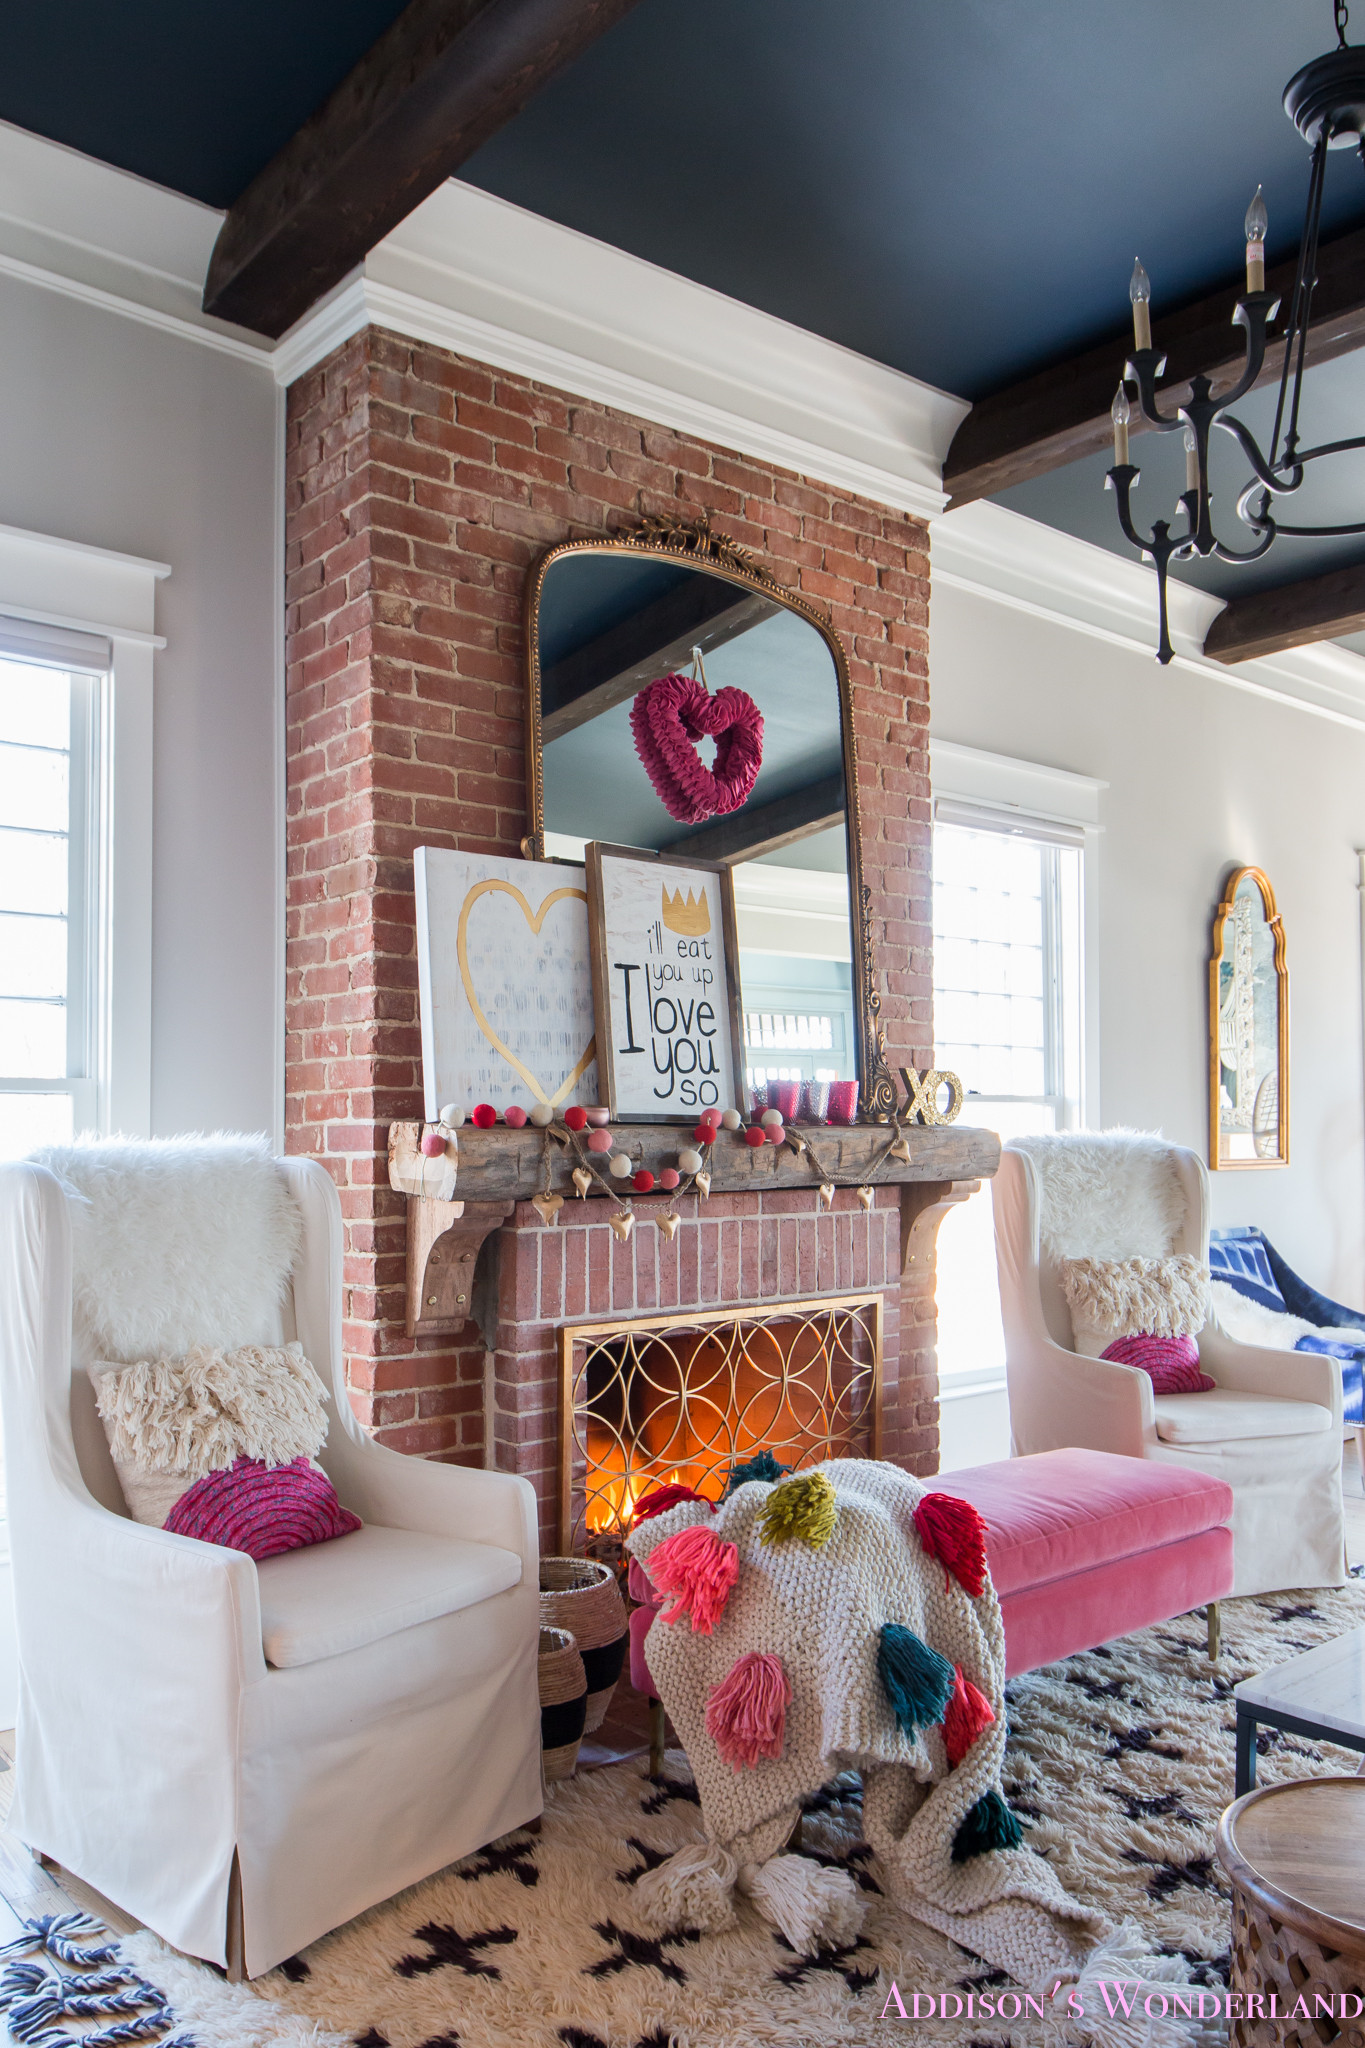 Ideas For Decorating Living Room
 Our Colorful Whimsical & Elegant Valentine s Day Living